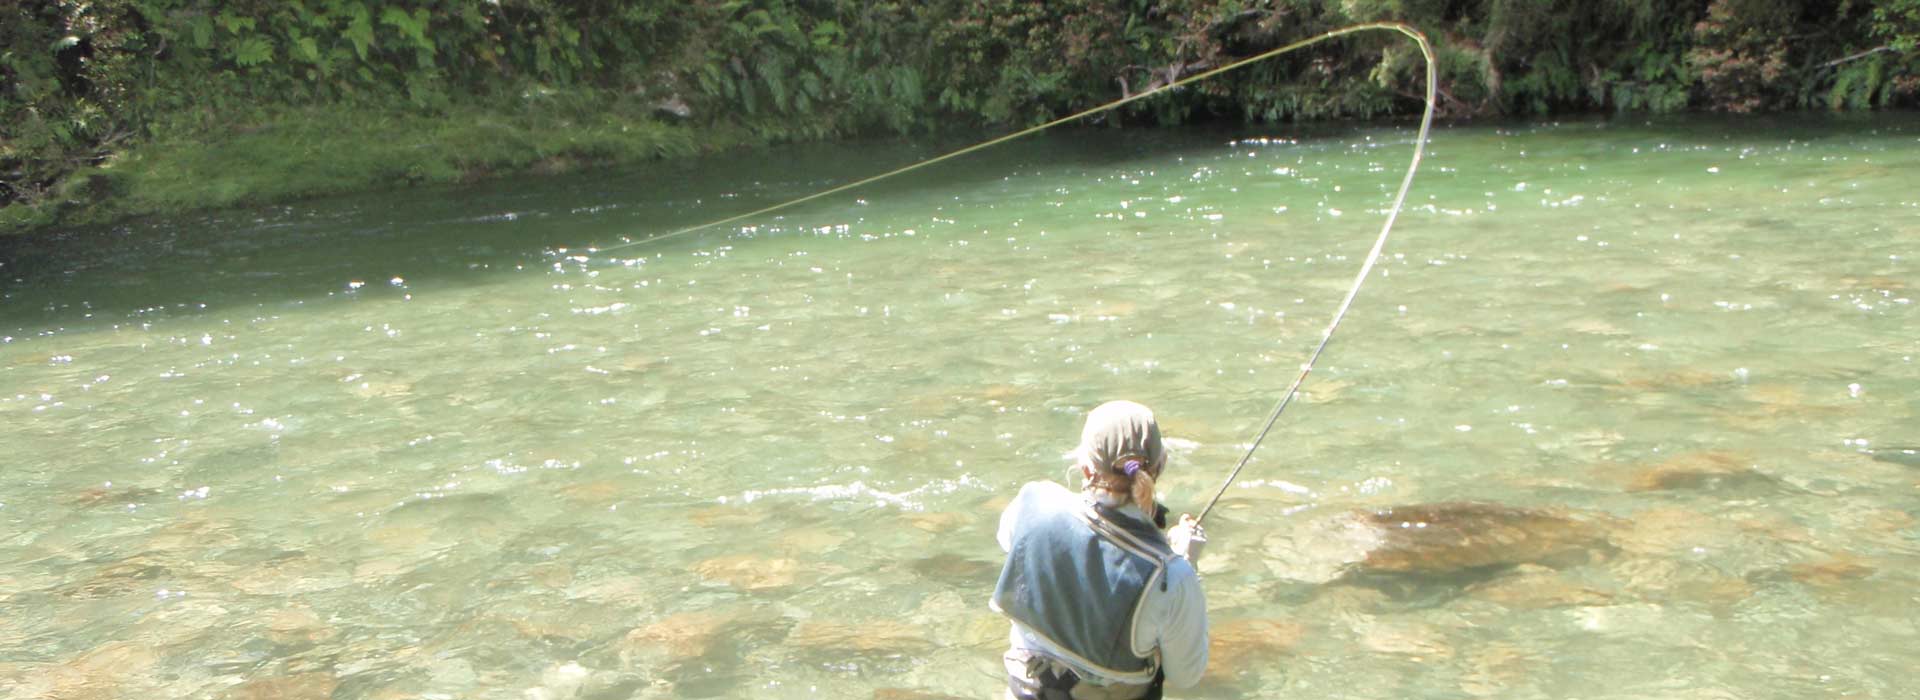 Trout fishing guide for the top of New Zealand's South Island